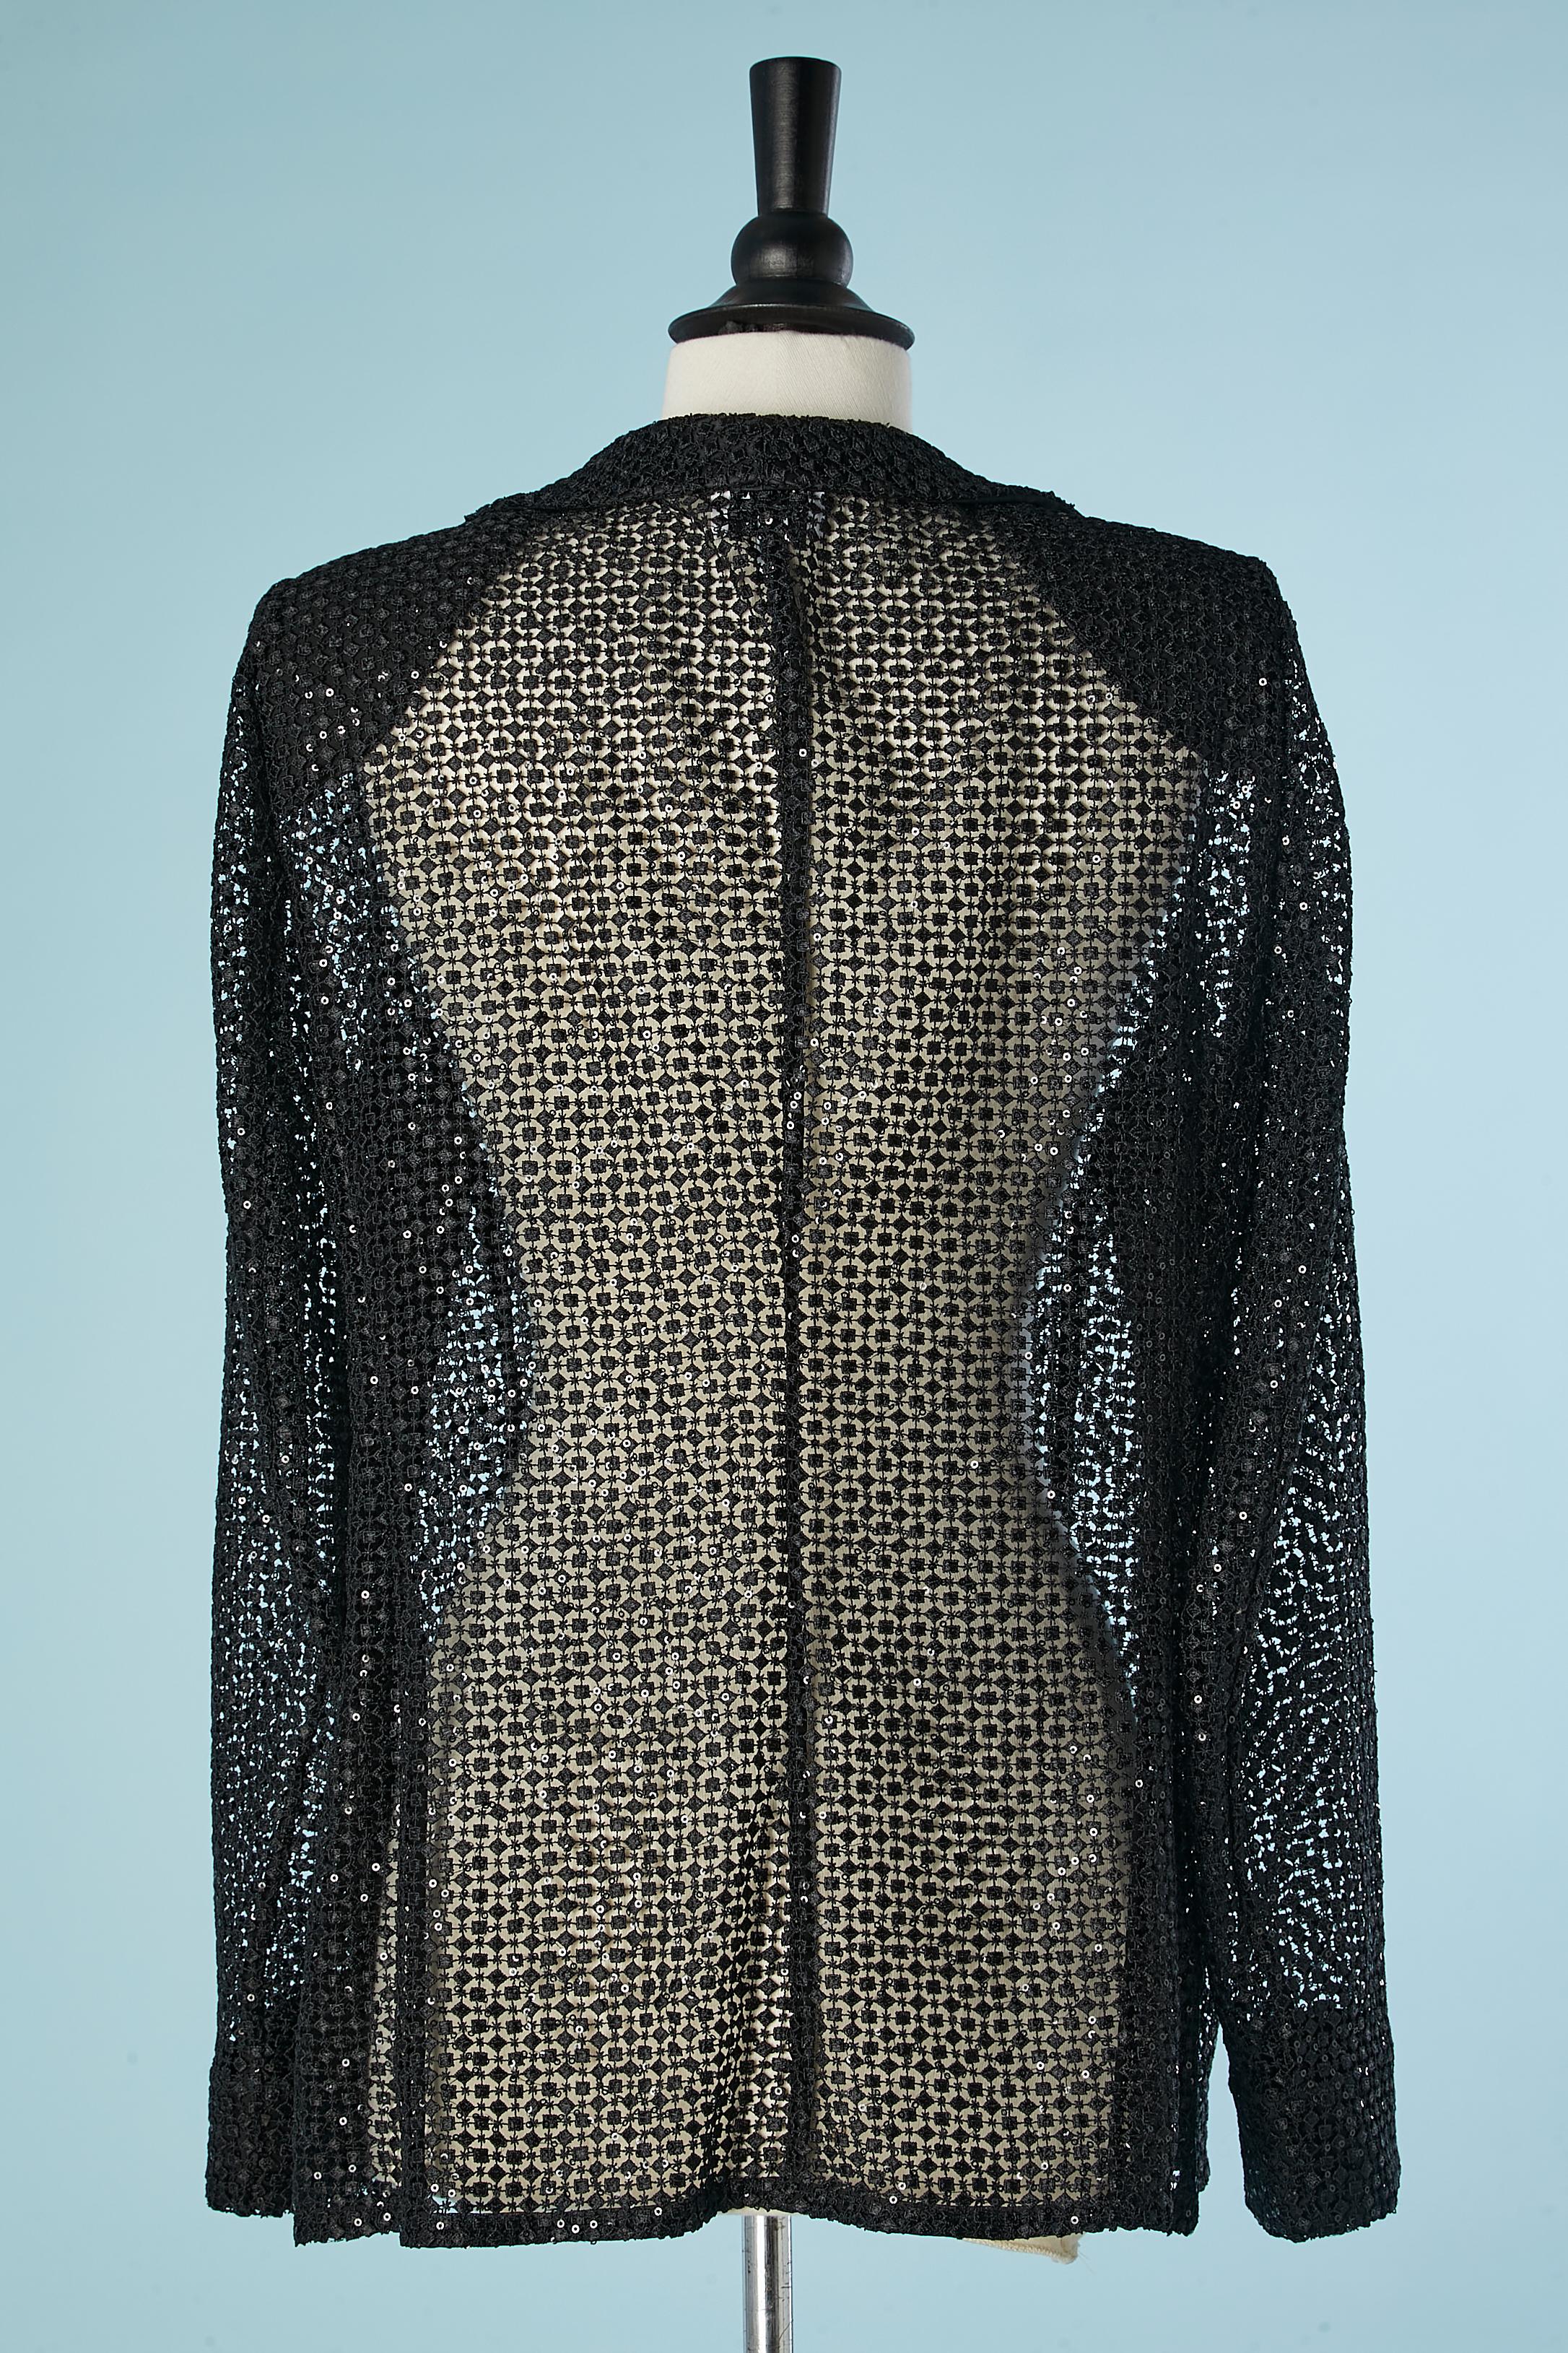 Black see-trough guipure (lace) and sequin evening jacket Armani Collezioni  For Sale 2